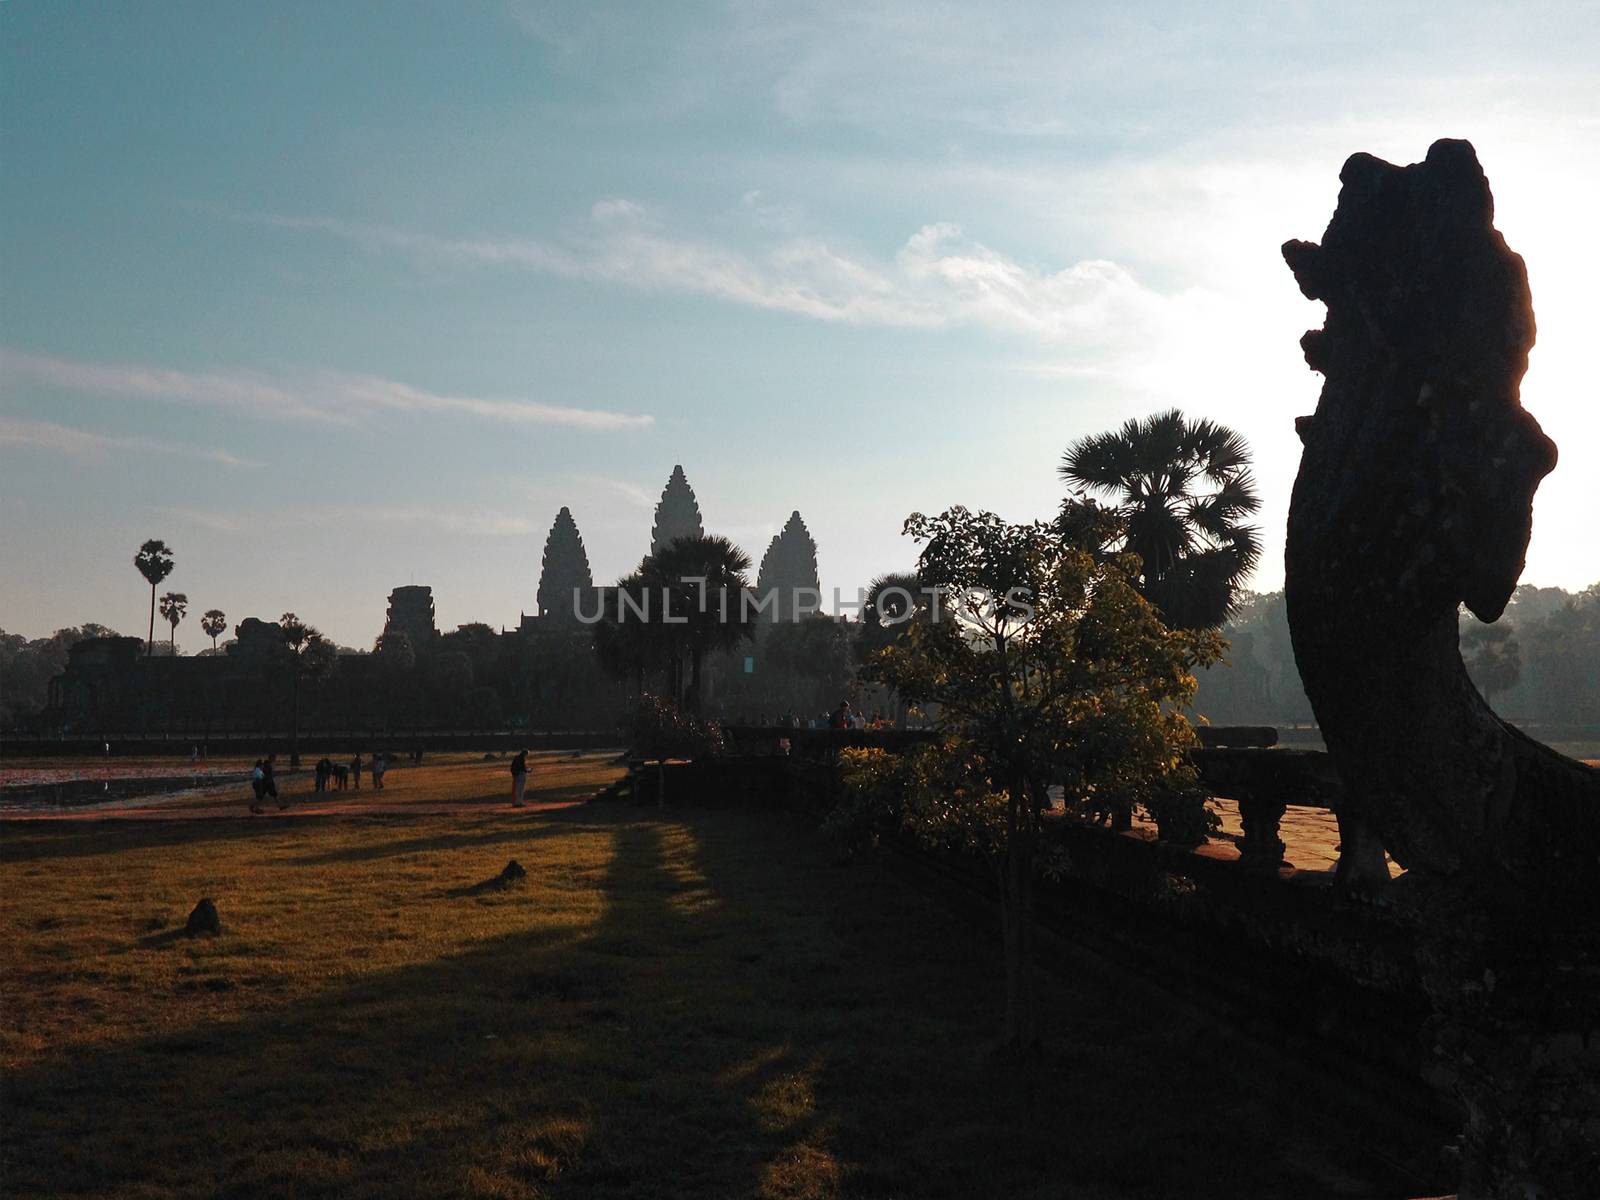 A beautiful morning sunrise shows Angkor Temple as silhouette on the entrance walkway to the Angkor Wat Complex in Siem Reap, Cambodia